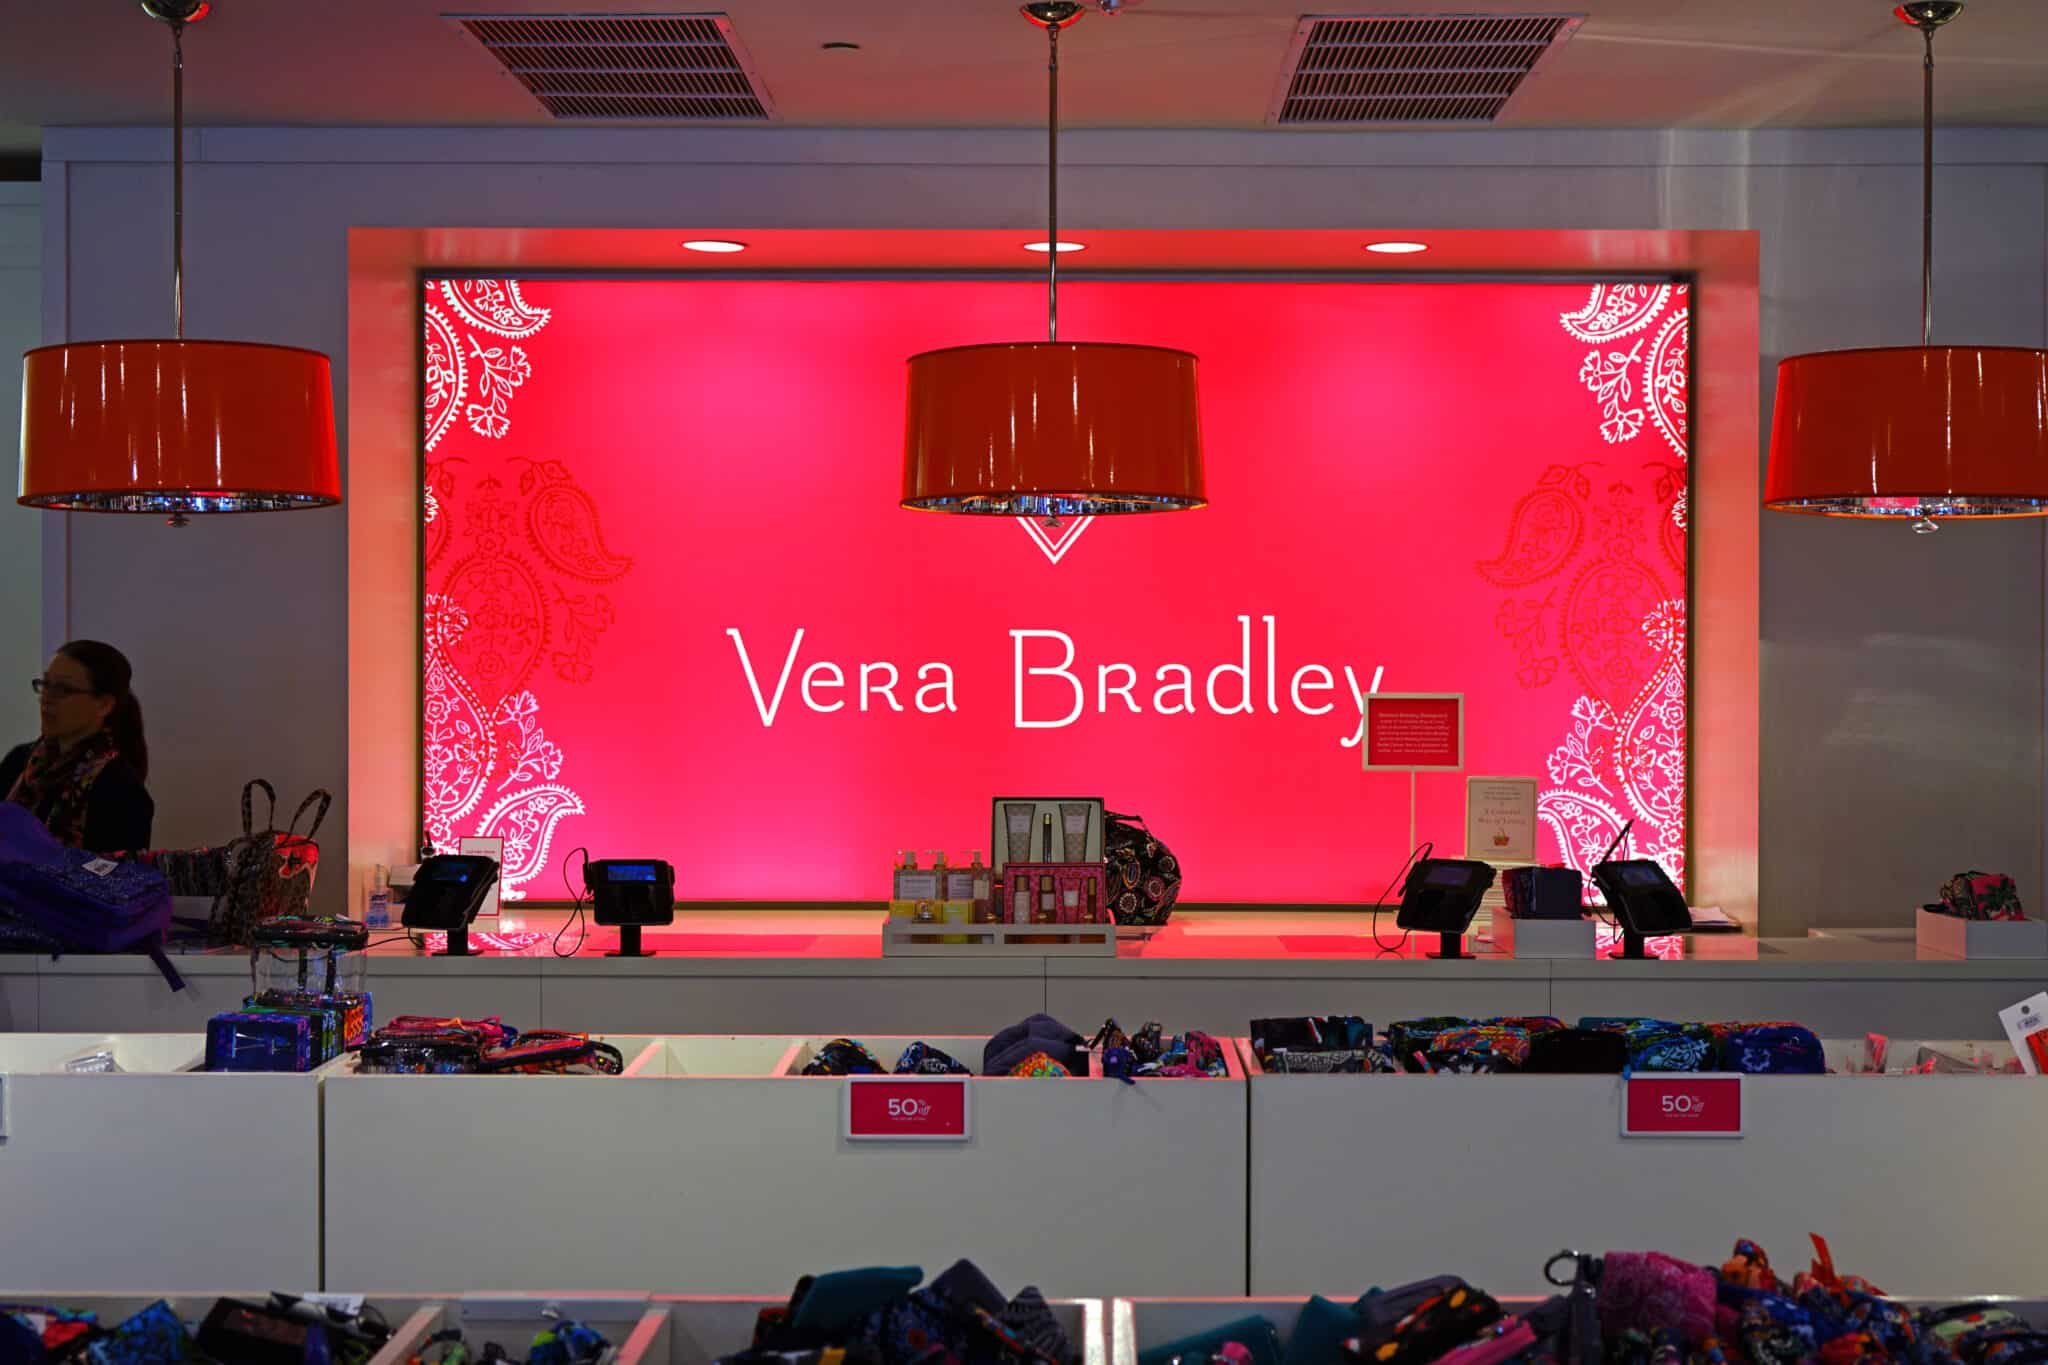 A brightly lit Vera Bradley store display features a large pink backdrop with the brand name centered in white text. Red pendant lights hang above the counter below, which has bags and accessories neatly arranged, and a sign indicating a sale. Truly, always iconic!